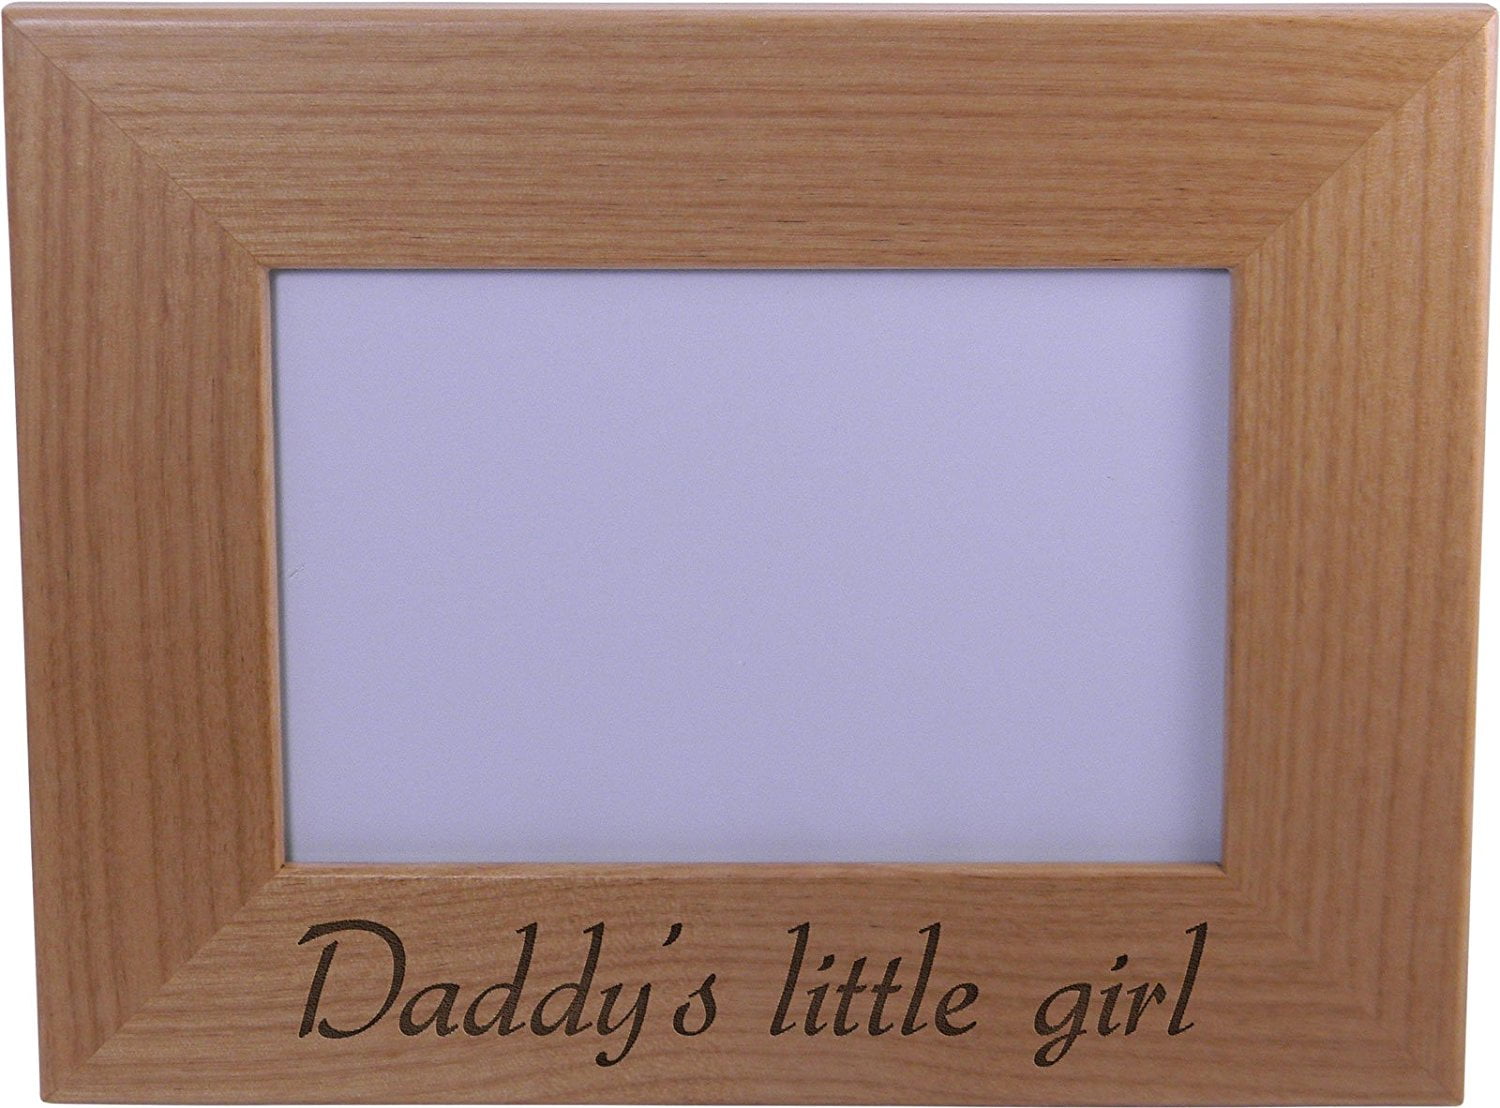 5x7 PERSONALIZED CUSTOM ENGRAVED DADDY'S LITTLE GIRL PICTURE FRAME GIFT 